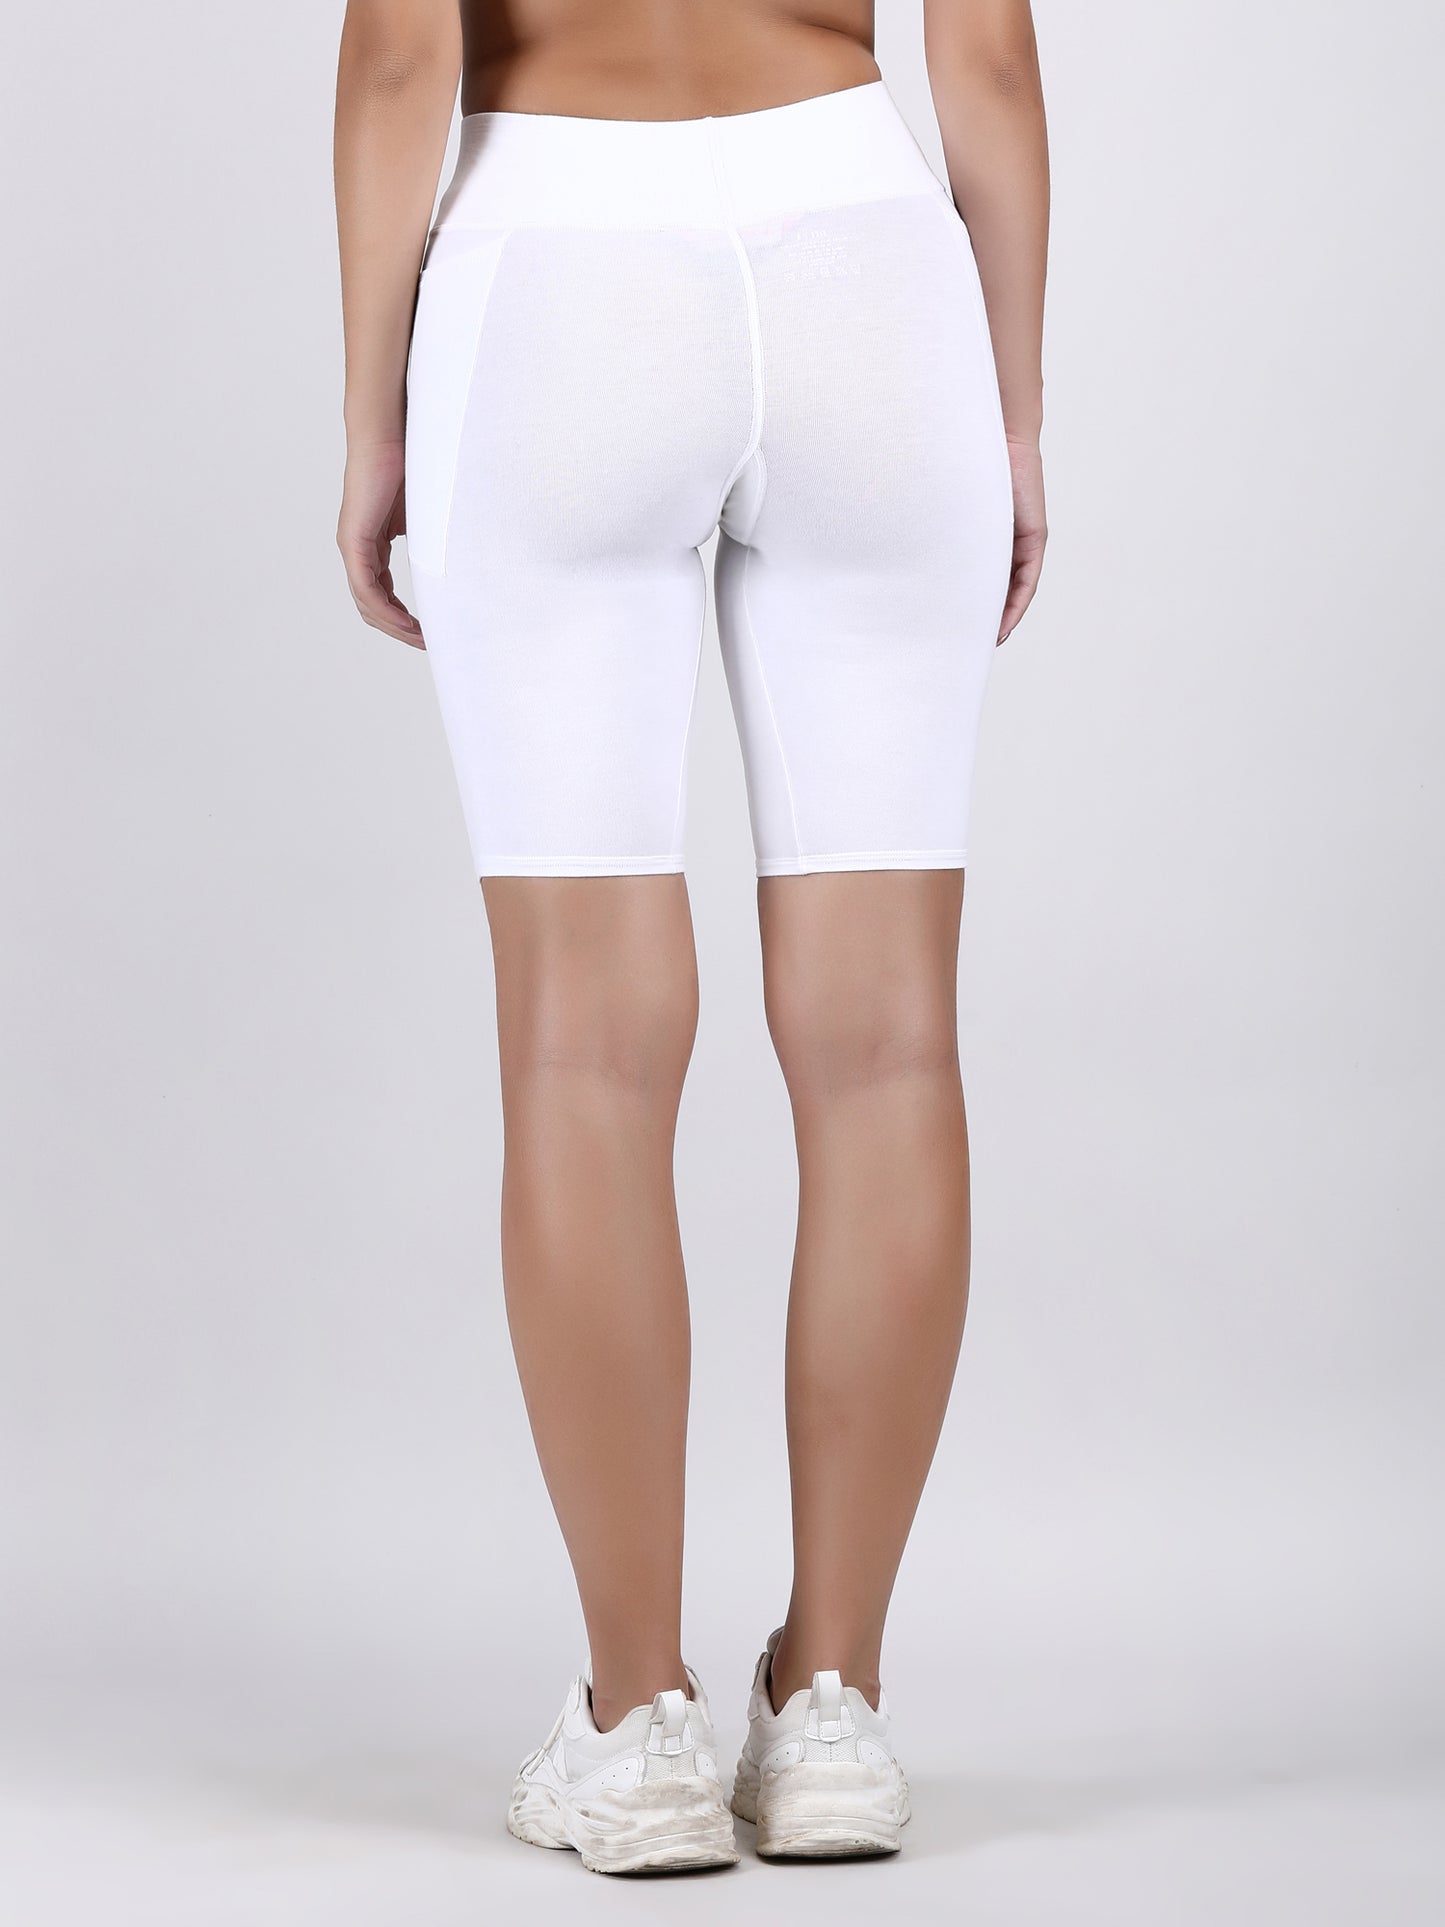 Adorna Shapparel Cycling Shorts for women with Tummy & Thigh Shaping and Sporty Wide Belt - Peace White